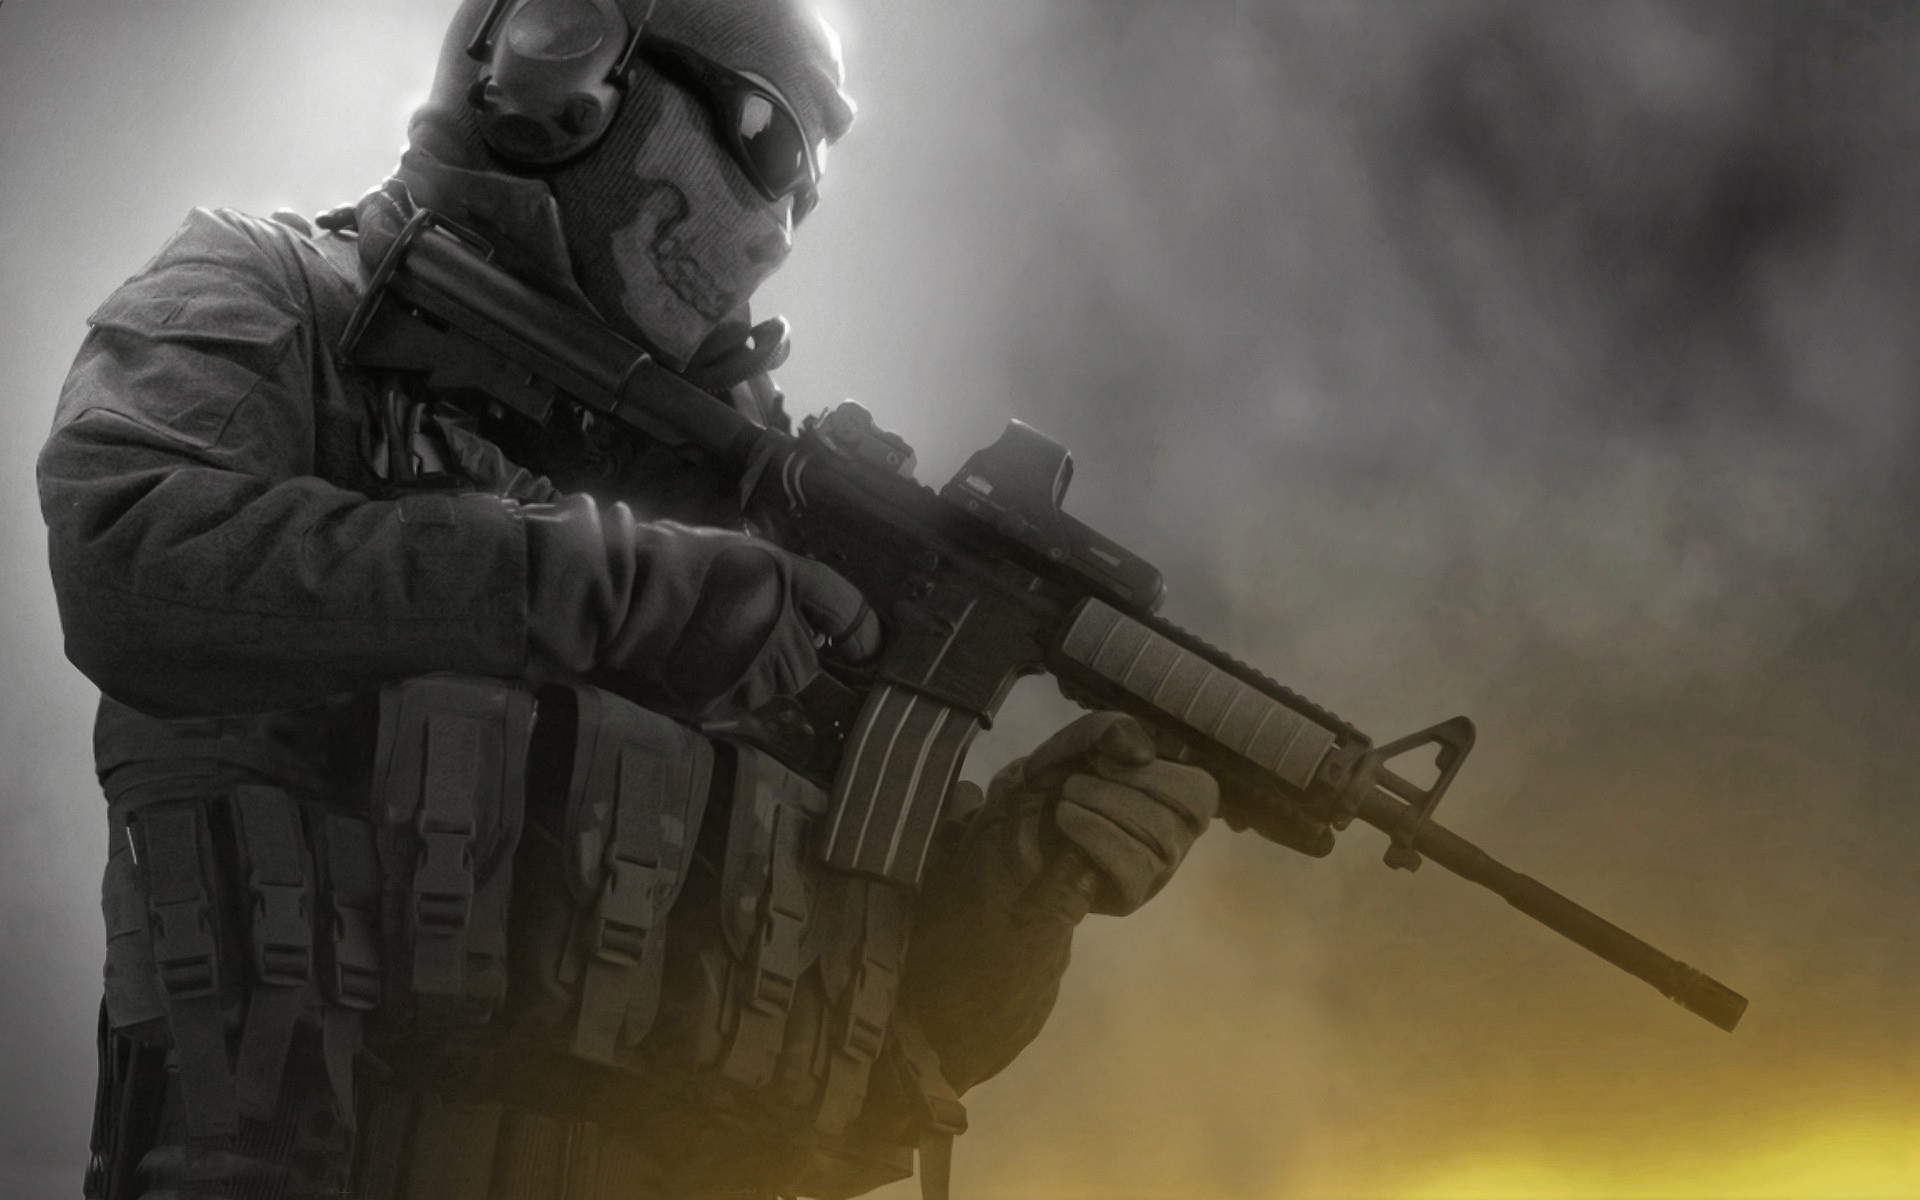 call of duty ghost wallpaper hd,soldier,military,personal protective equipment,shooter game,army